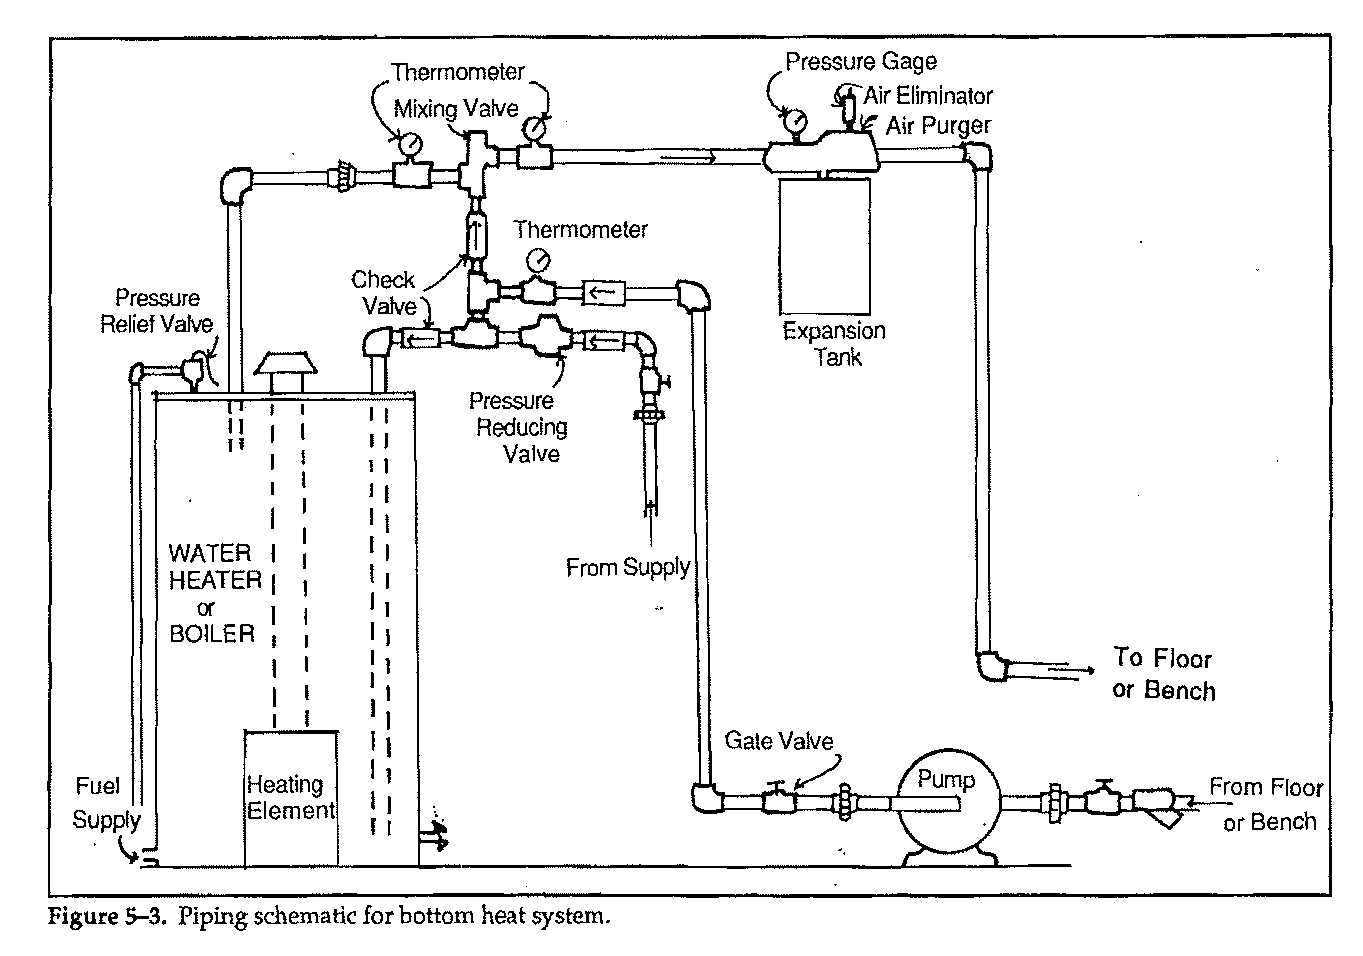 Steam To Hot Water Heat Exchanger Piping Diagram